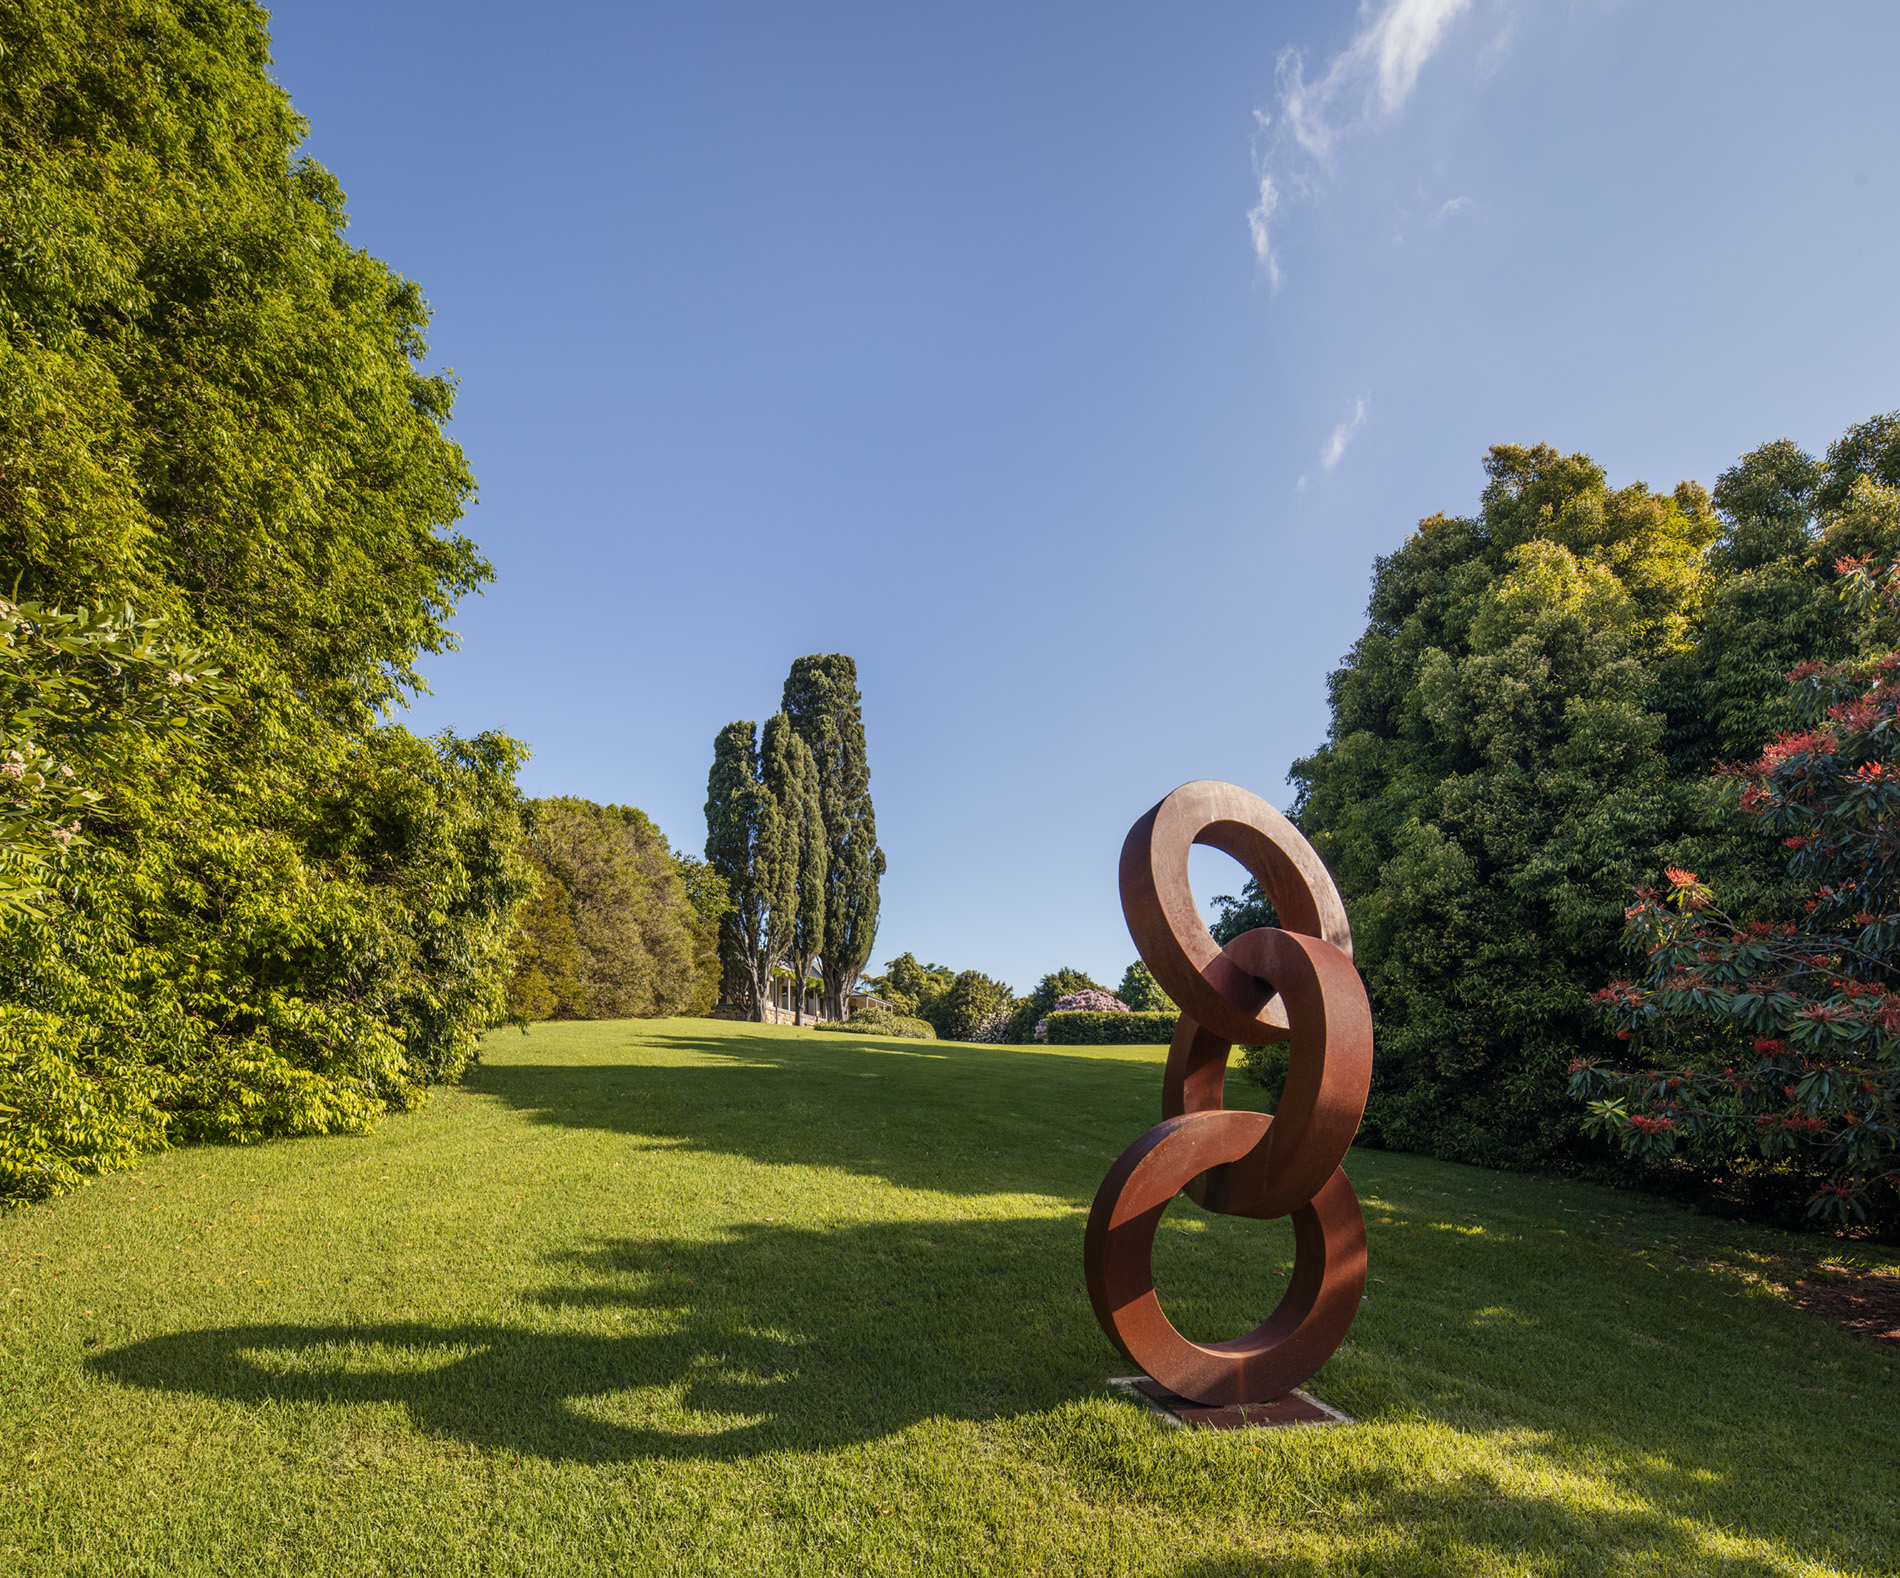 A photograph of a large metal sculpture of interlocking circles stacked vertically. The sculpture sit in a garden, with a house in the background.